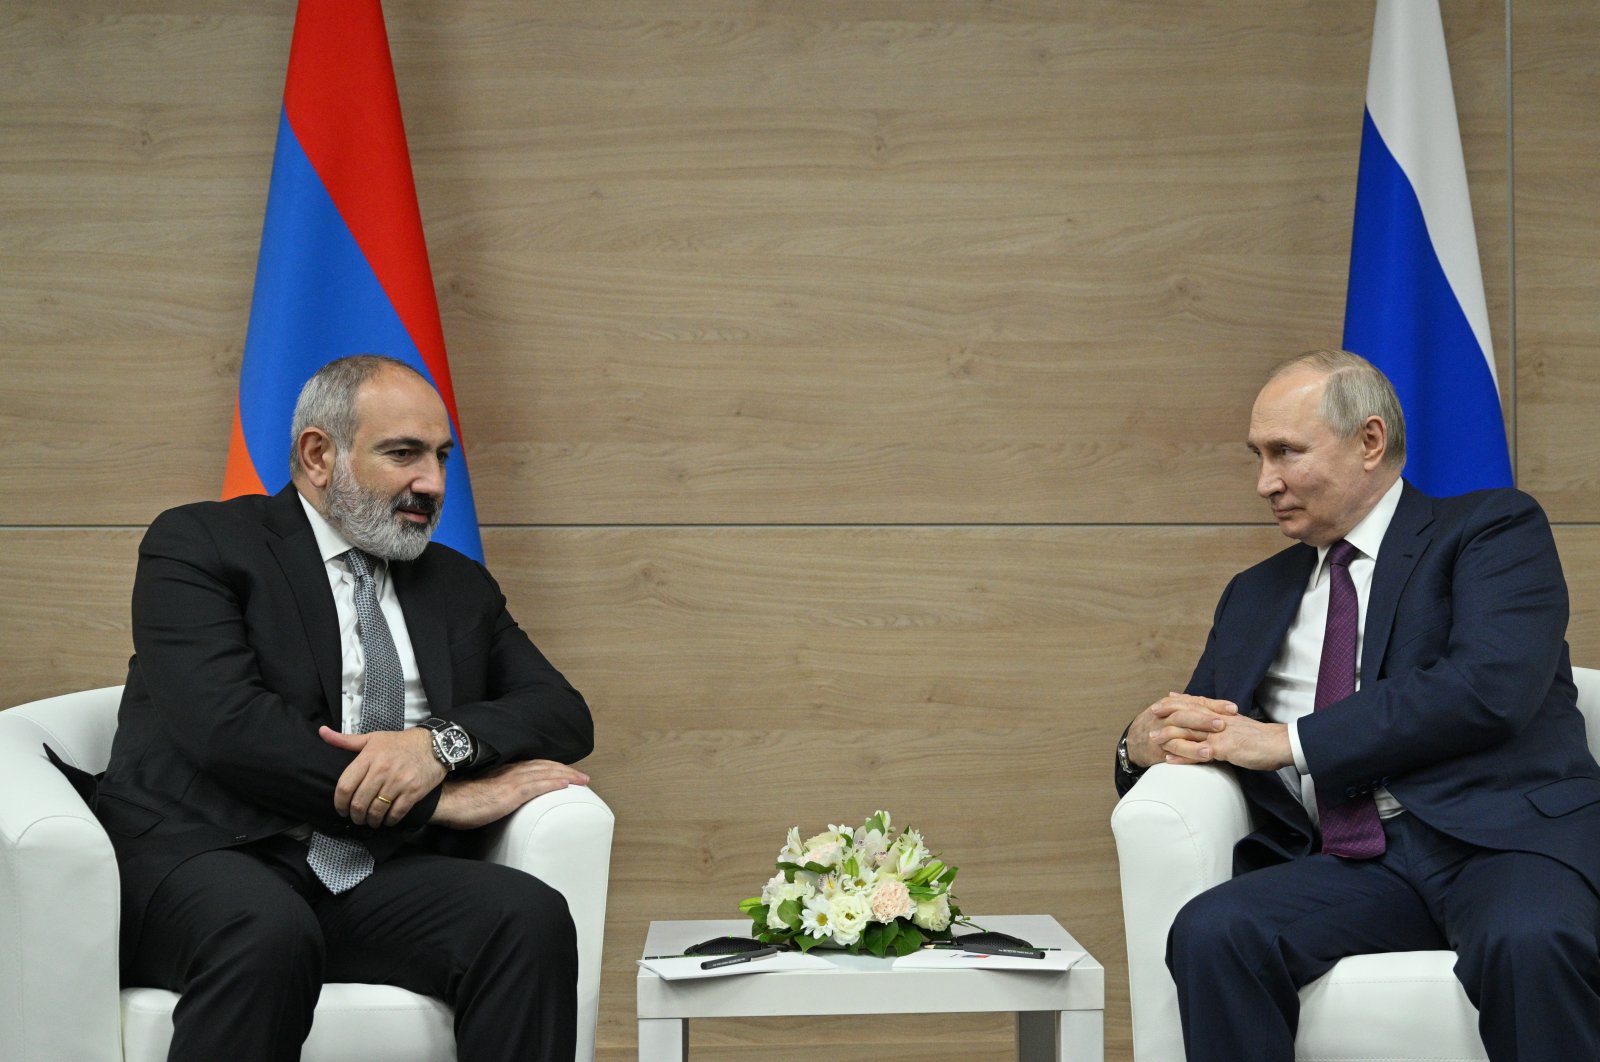 Russian President Vladimir Putin (R) meets with Armenian Prime Minister Nikol Pashinian (L), during the Eurasian Intergovernmental Council and the Council of CIS Heads of Government meetings, in Sochi, Russia, June 6, 2023.  (Government Press Service via EPA)